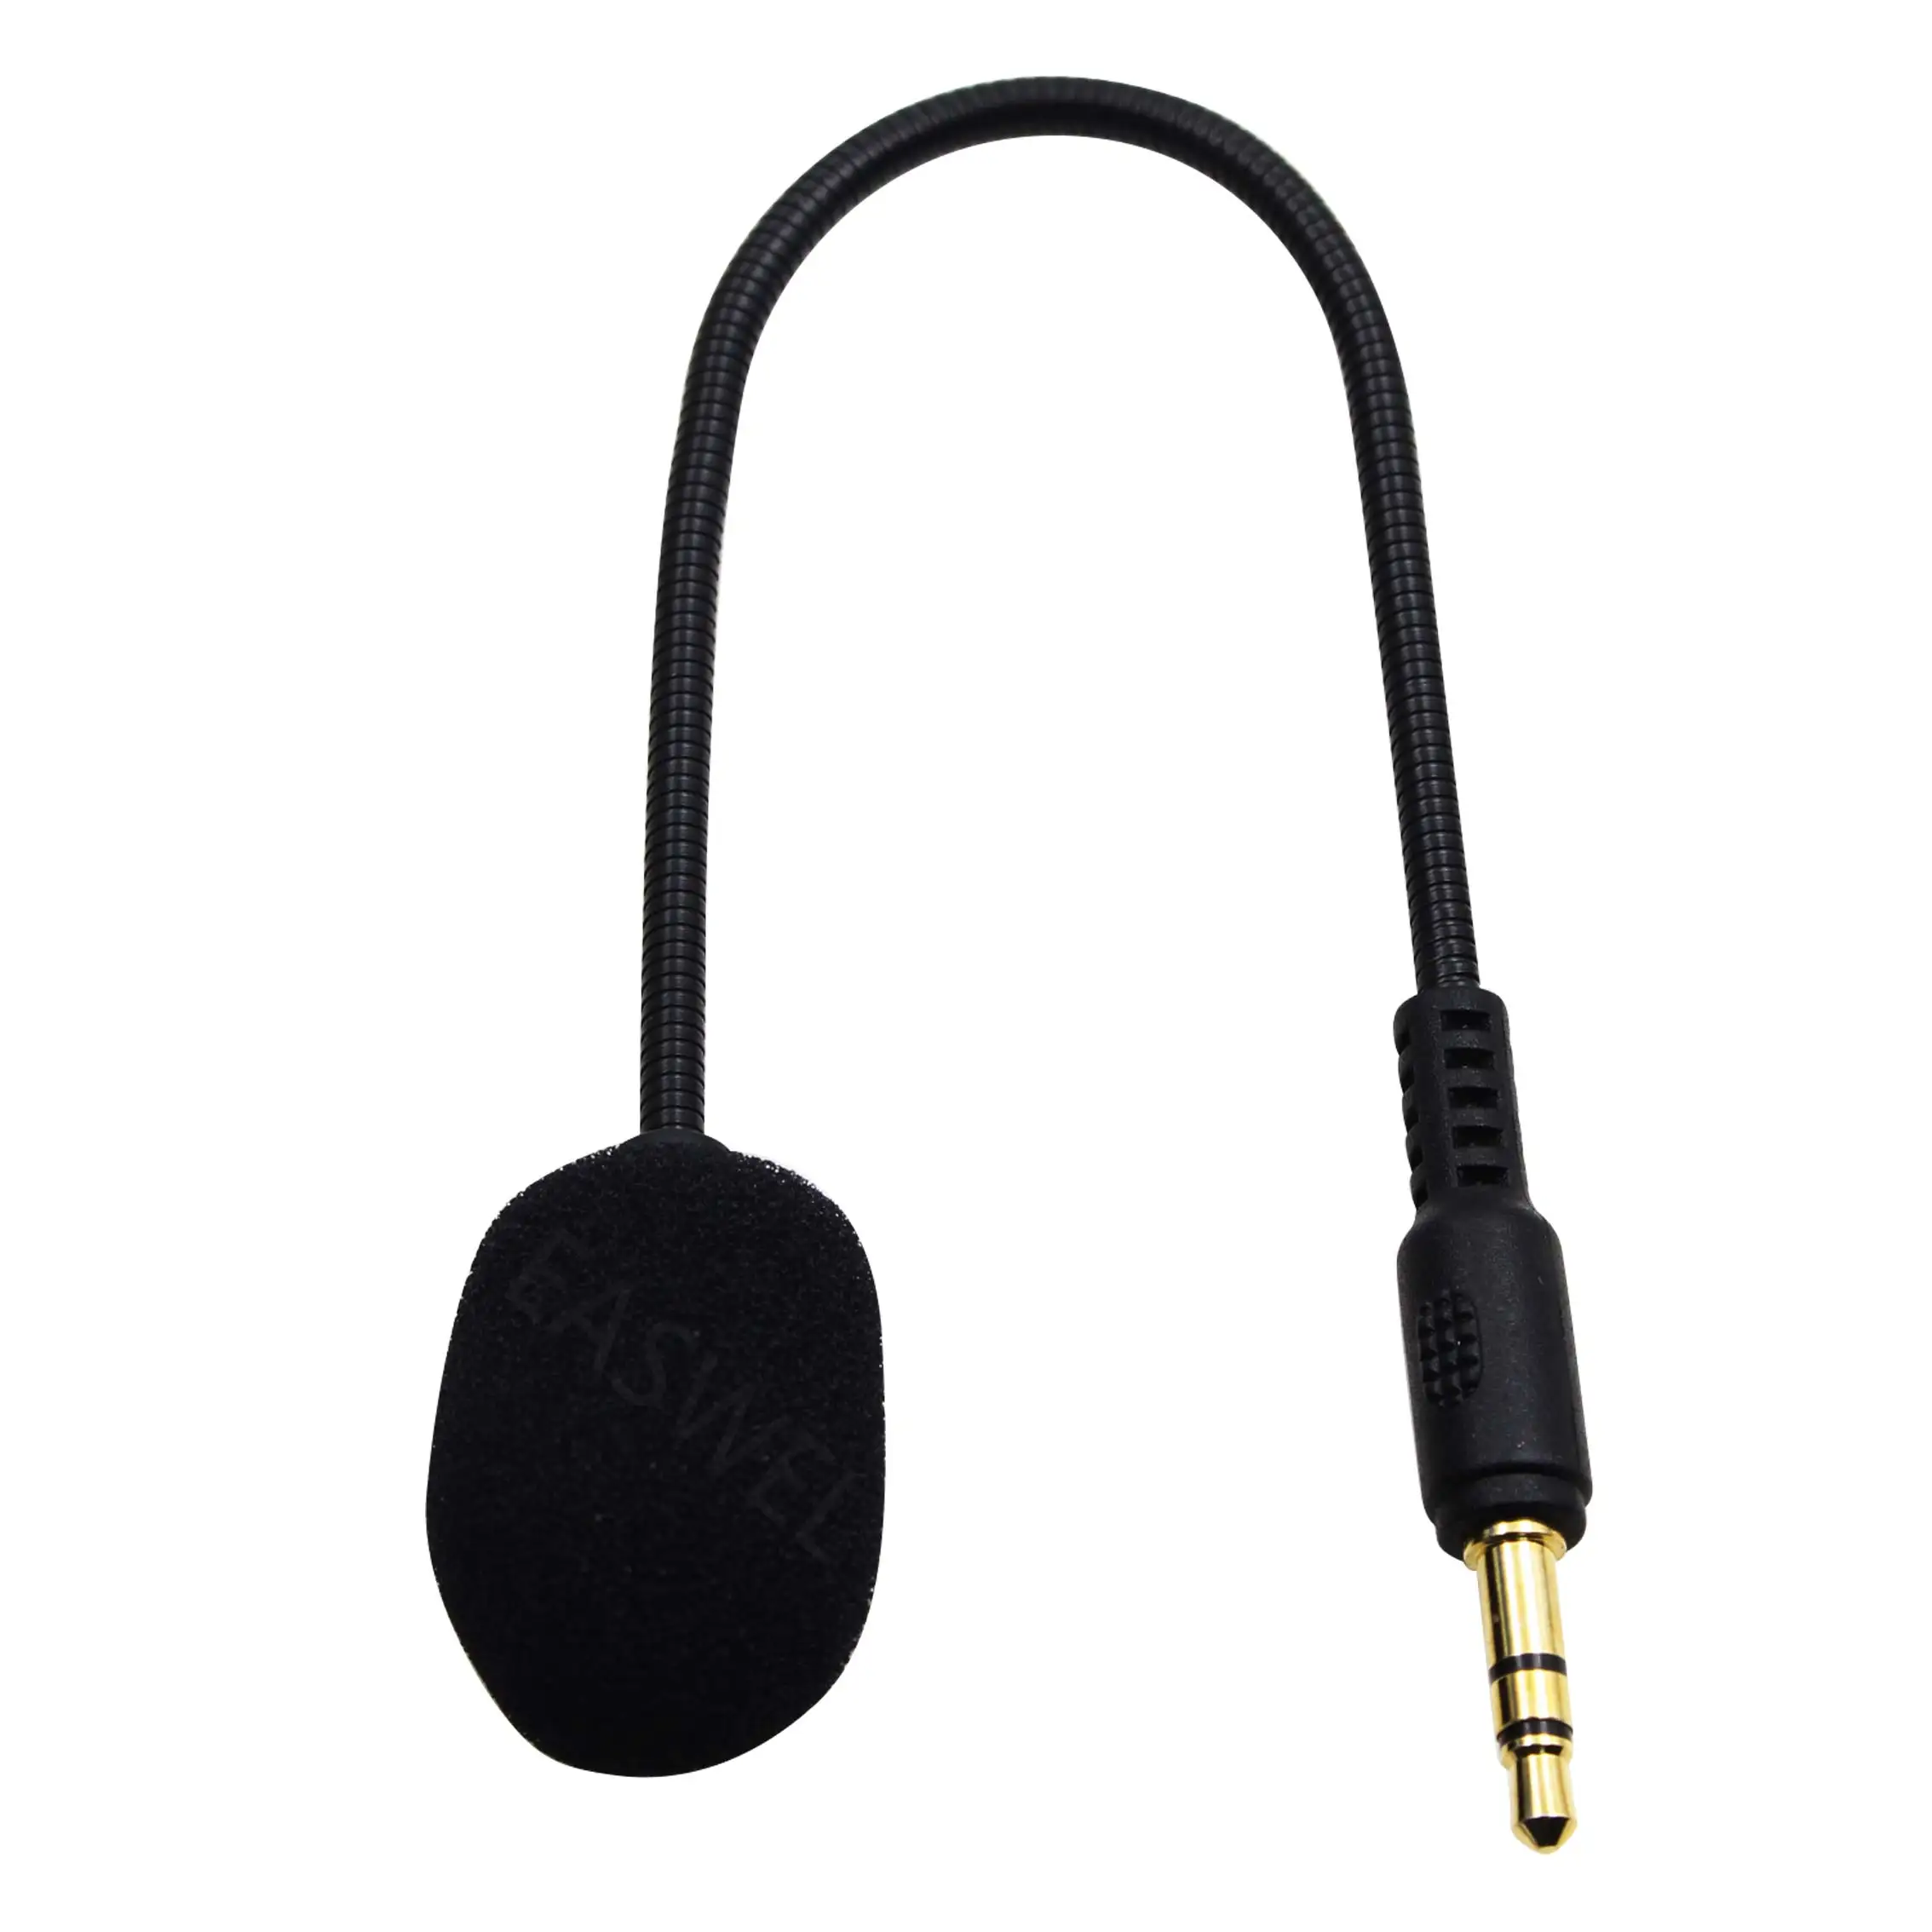 Buitenshuis aardappel Conclusie Replacement Microphone For Plantronics Rig 400hx 400lx 400hs Xbox Gaming  Headset - Buy Headphones Pc Computers Product on Alibaba.com